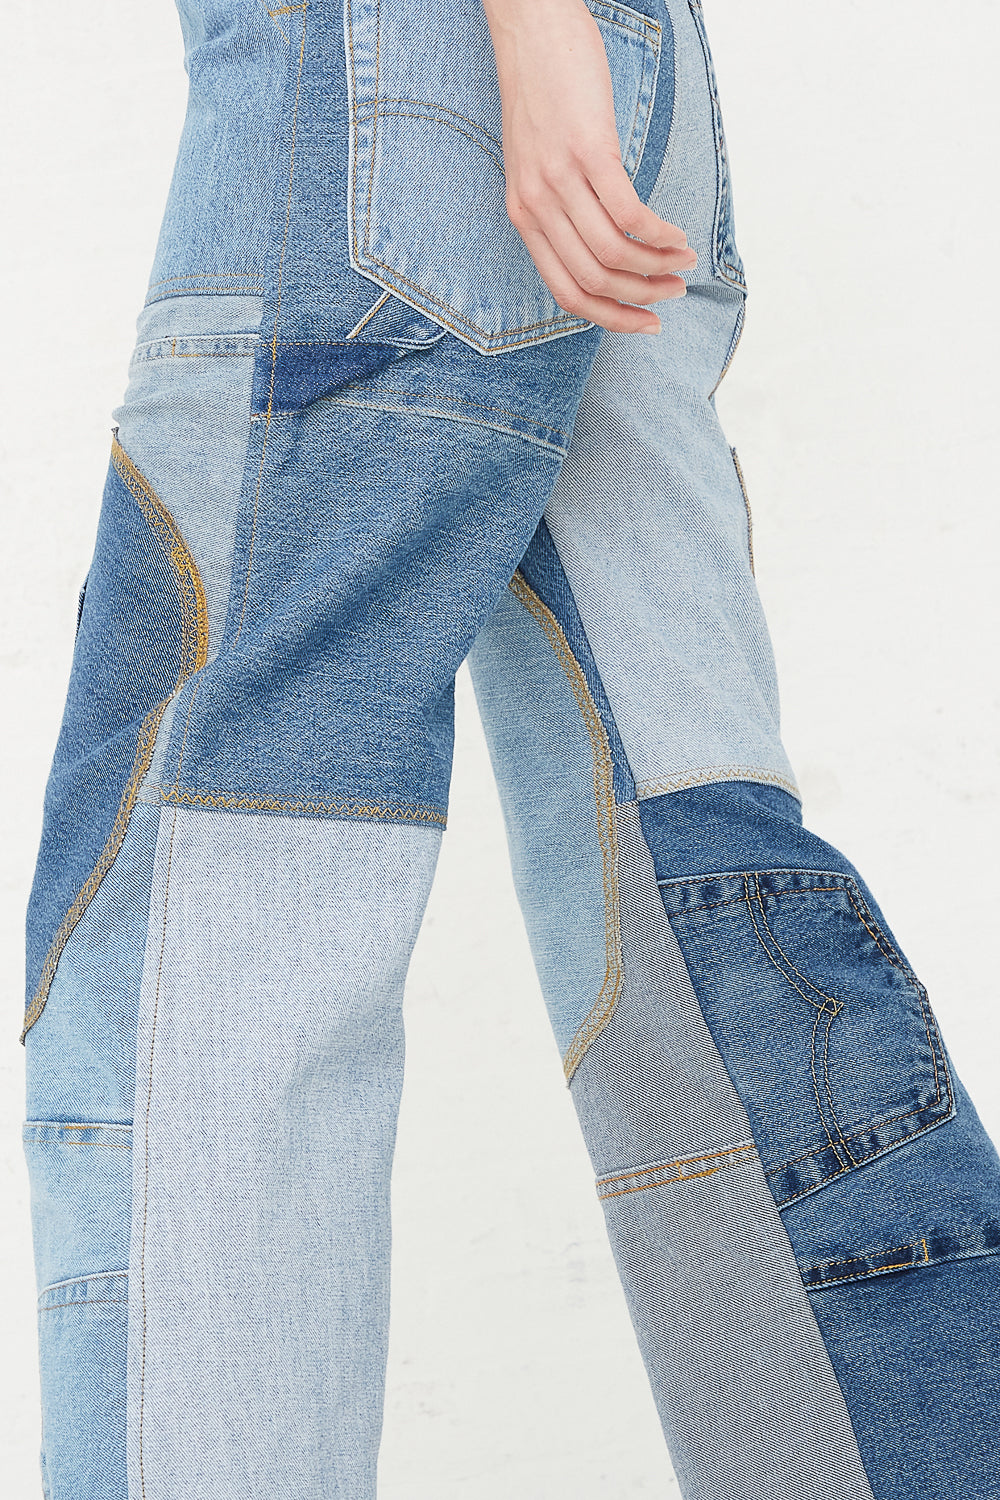 WildRootz - Reworked Jeans in Blue Variation A - S side leg detail